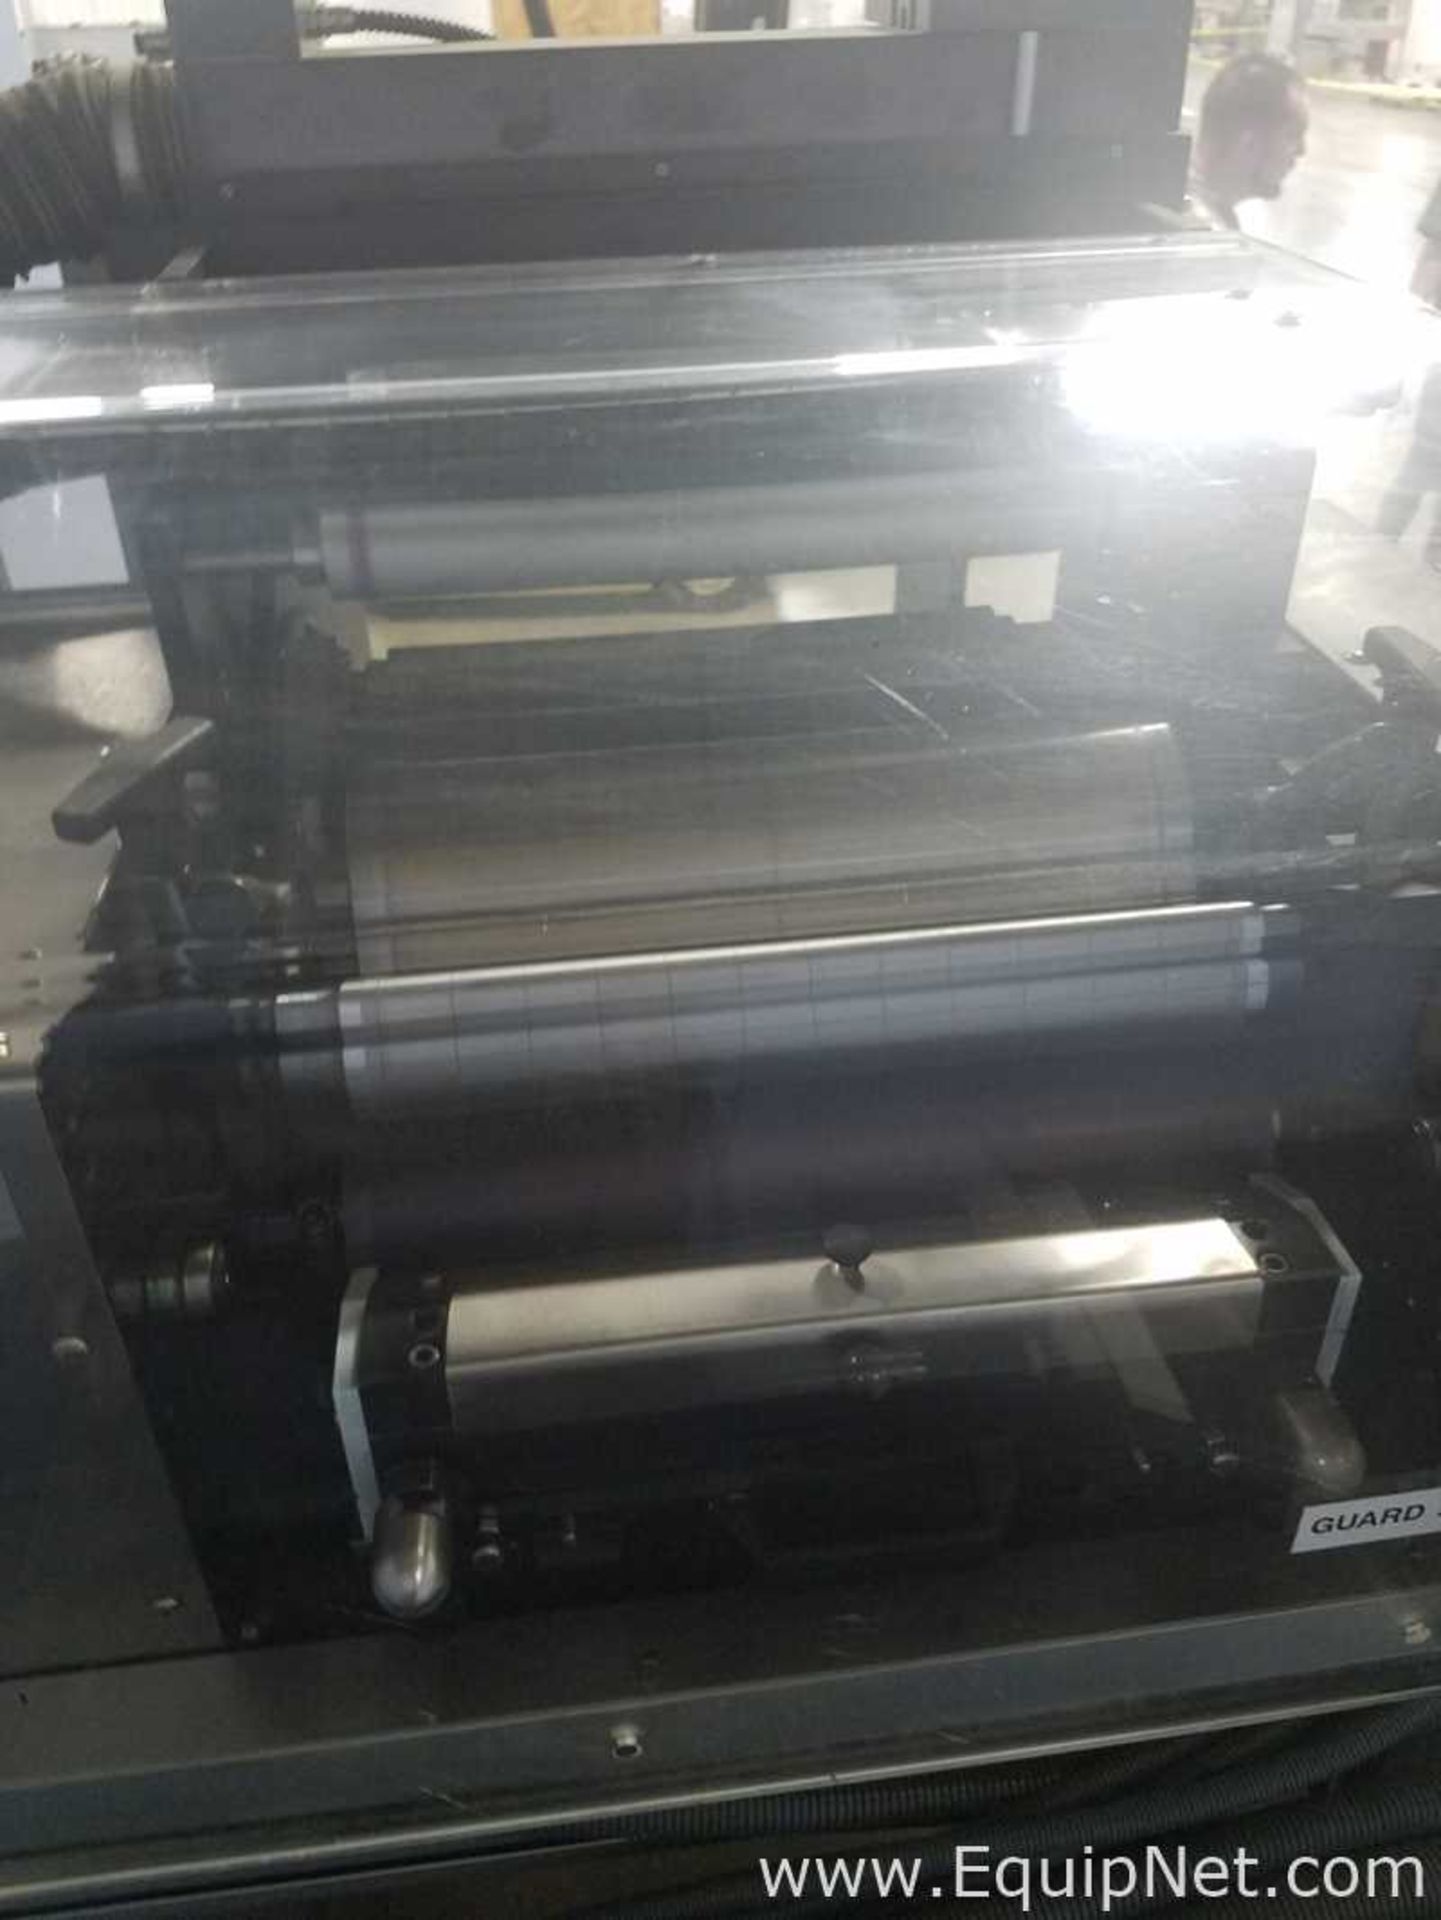 EQUIPNET LISTING #649374; REMOVAL COST: $20; MODEL: inPRINT 310; DESCRIPTION: Metronic inPRINT 310 - Image 7 of 13